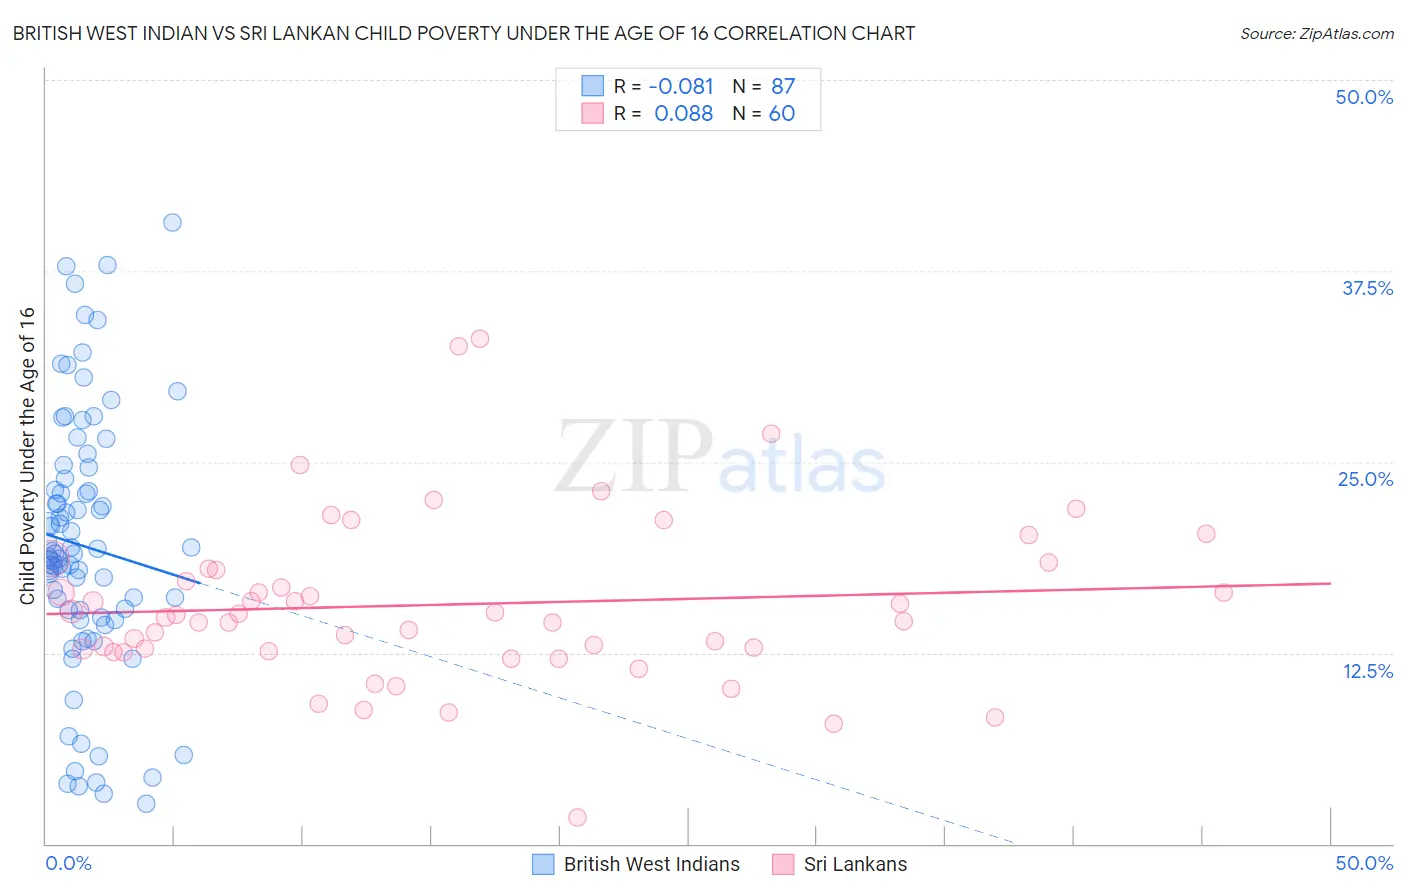 British West Indian vs Sri Lankan Child Poverty Under the Age of 16